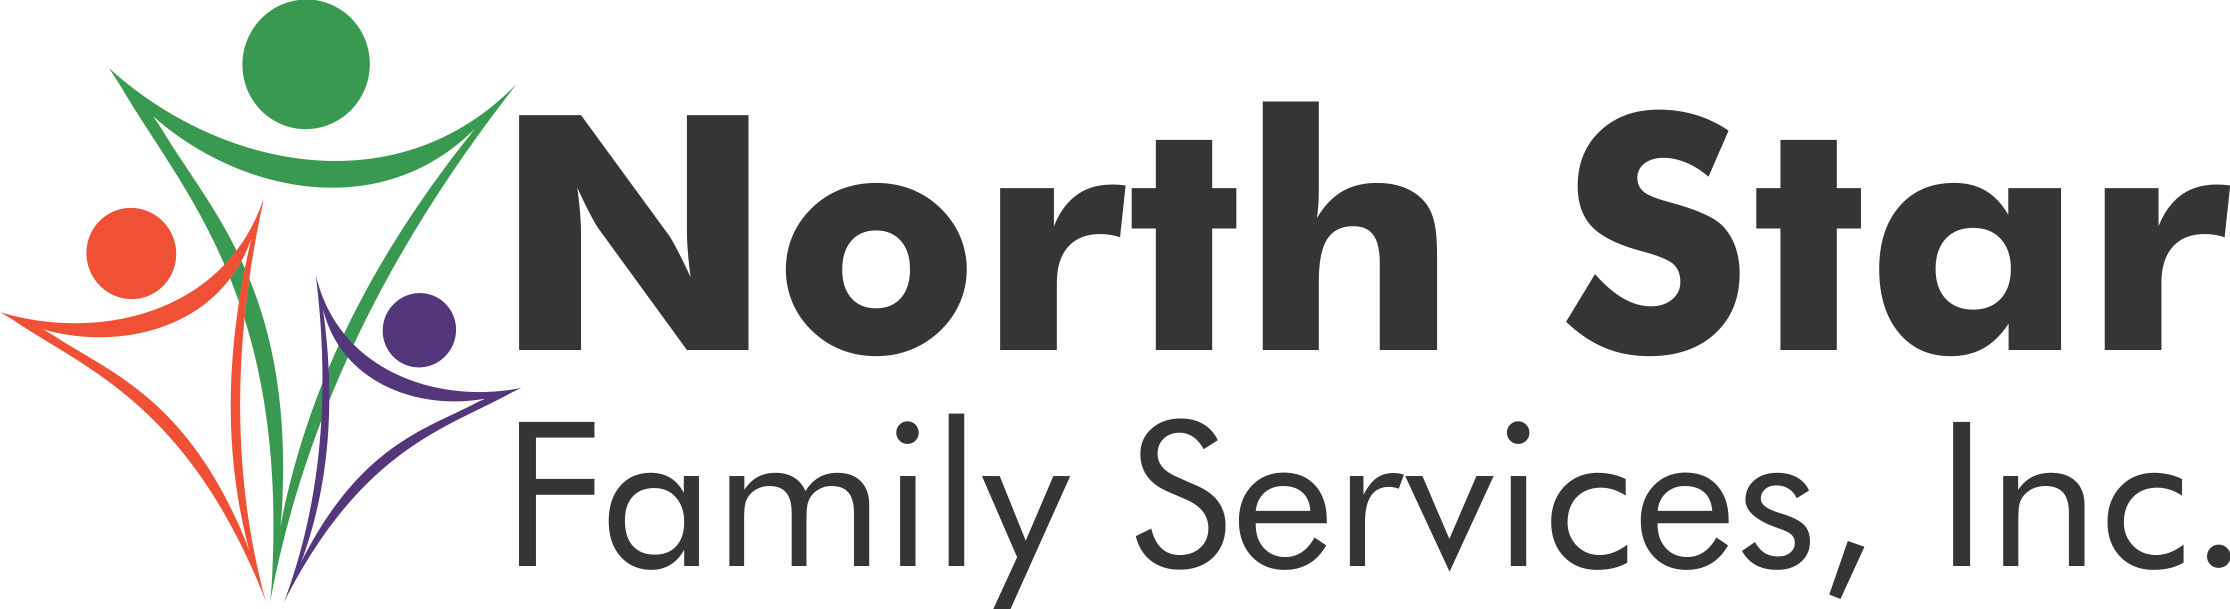 North Star Family Services, Inc.